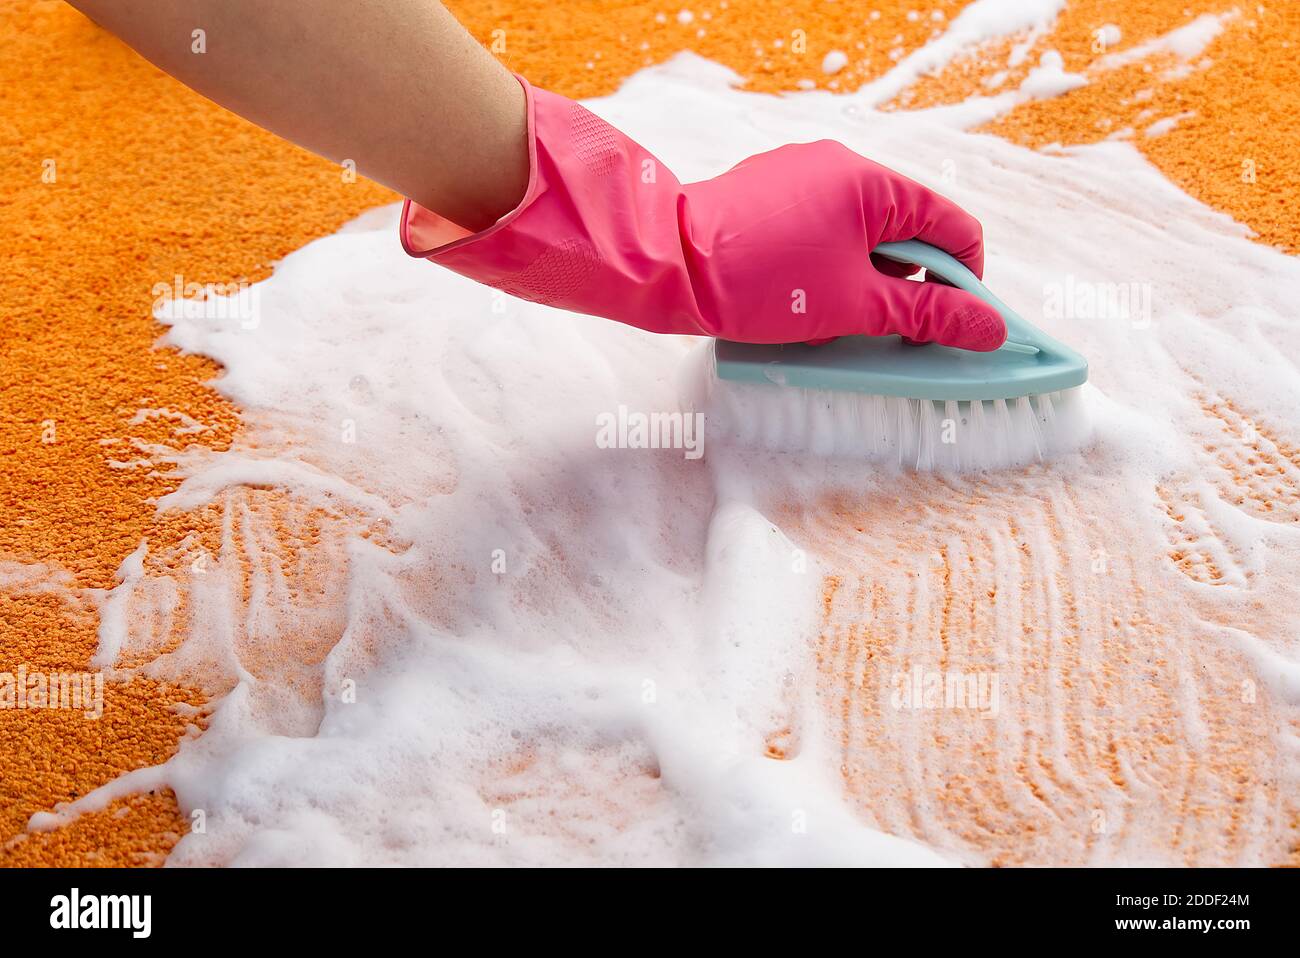 enfermedad Vacaciones estimular Woman Hand Cleaning Stain On Carpet With hard brush. Orange carpet cleaning.  carpet cleaning service concept Stock Photo - Alamy